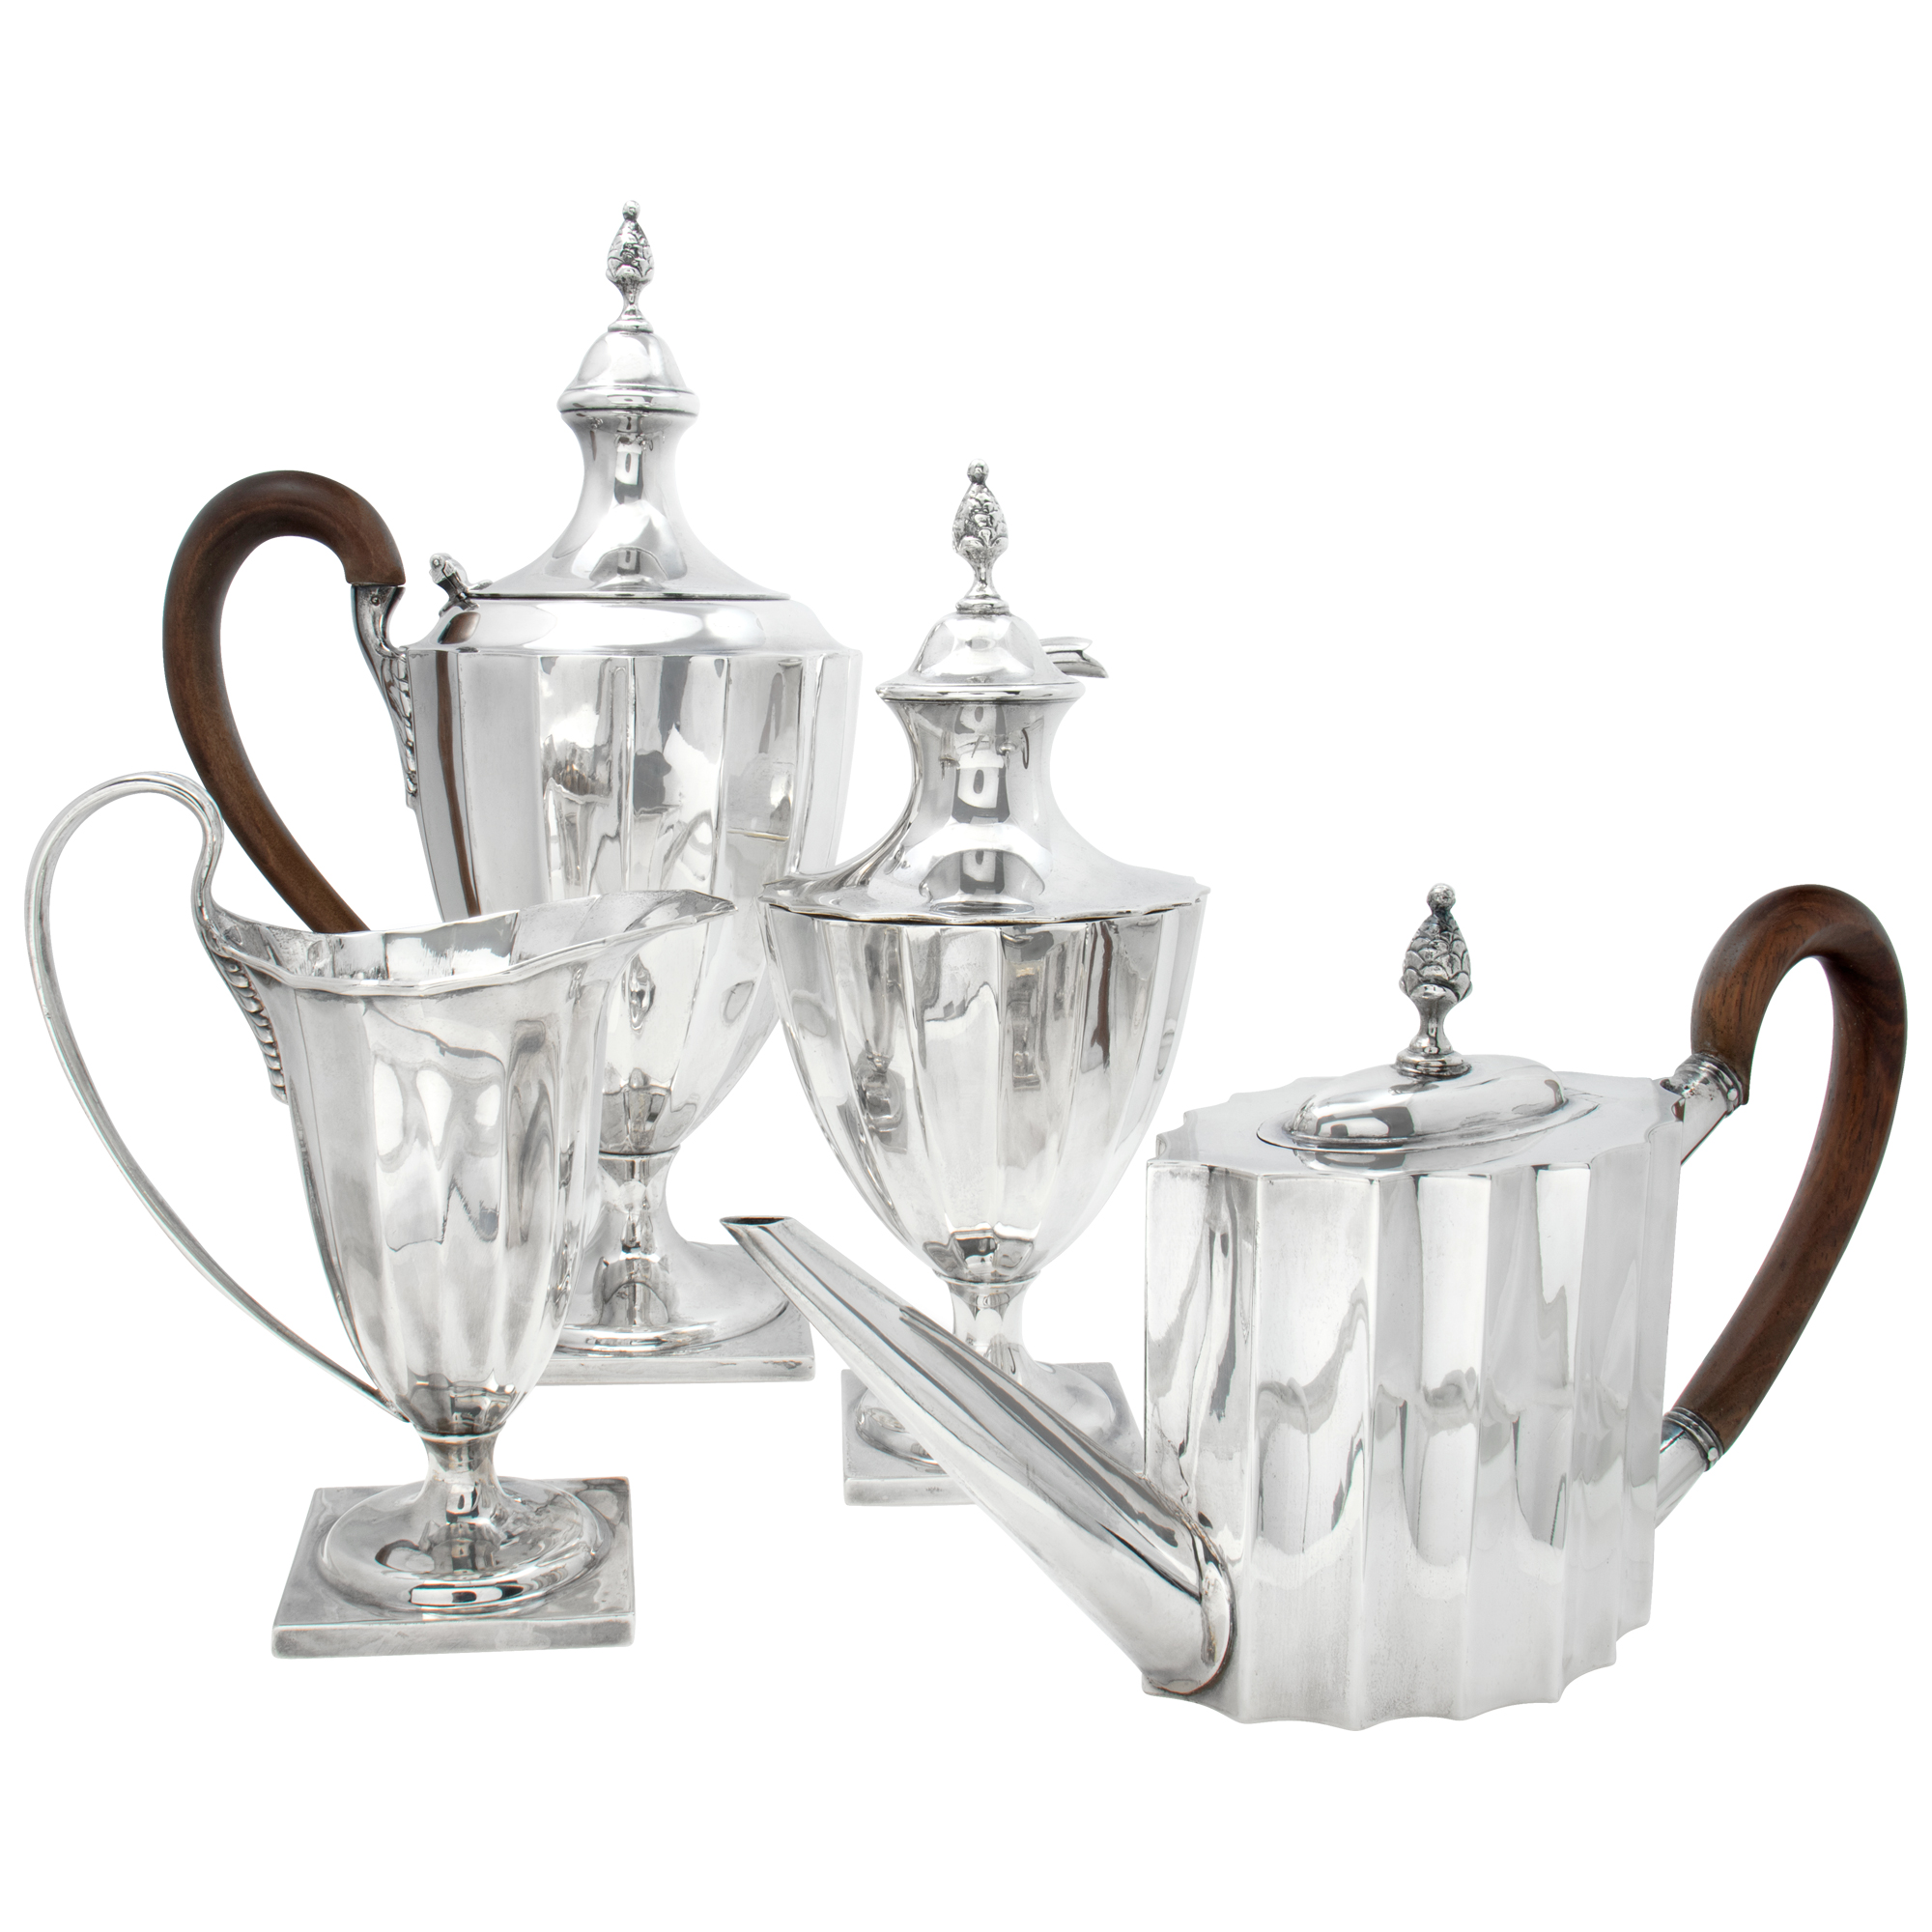 LUCO heavy Hand Wrought Sterling Silver, 4 pieces Tea/coffee set, 1960's reproduction of 1792 English Tea/Coffee set. Over 63 troy ounces of .925 handwrought sterling sil